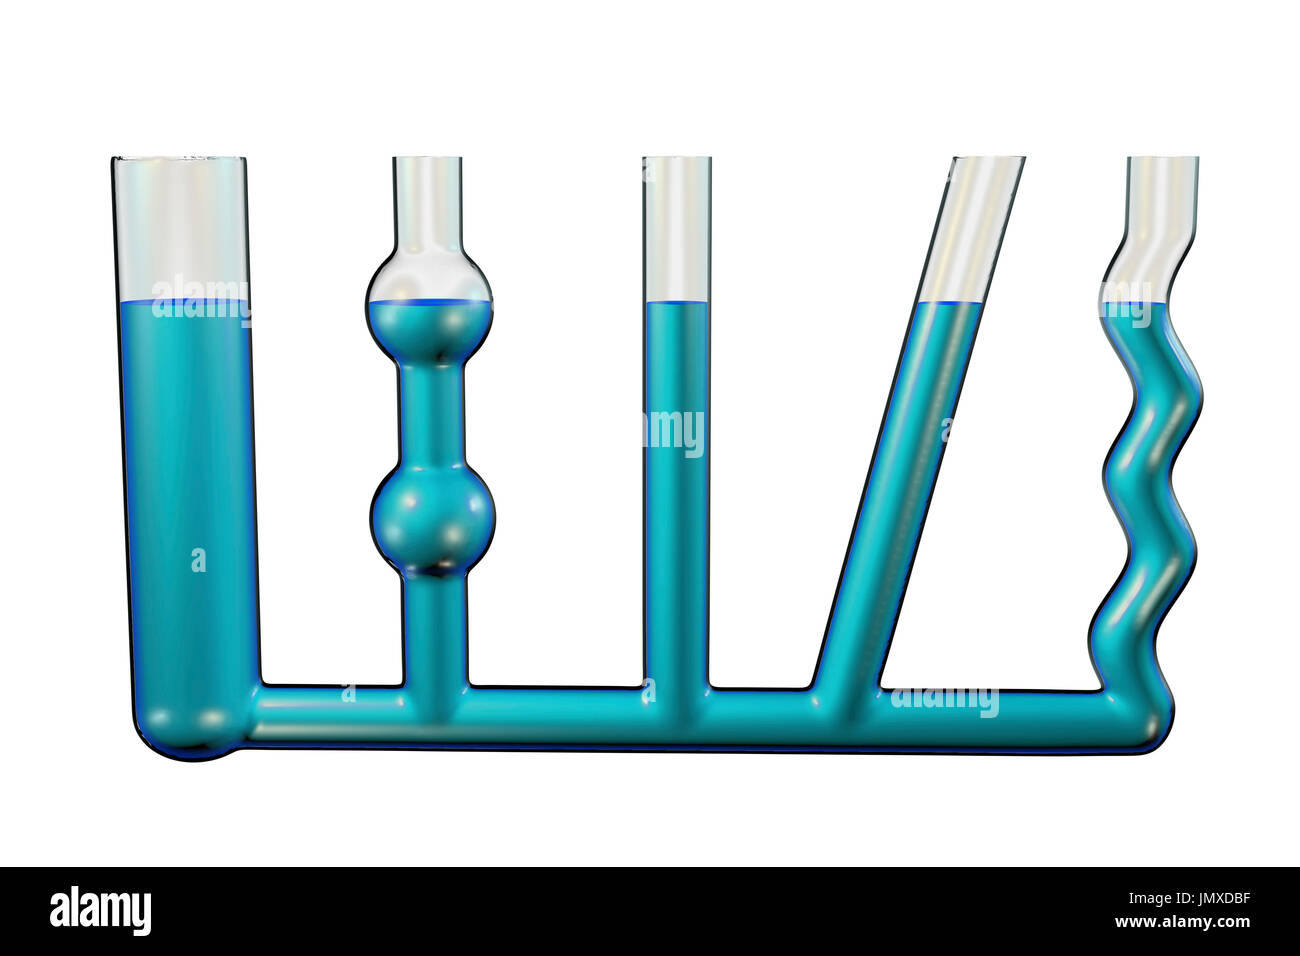 Communicating vessels, a type of laboratory glassware, are used to demonstrate Stevin's Law. Stock Photo